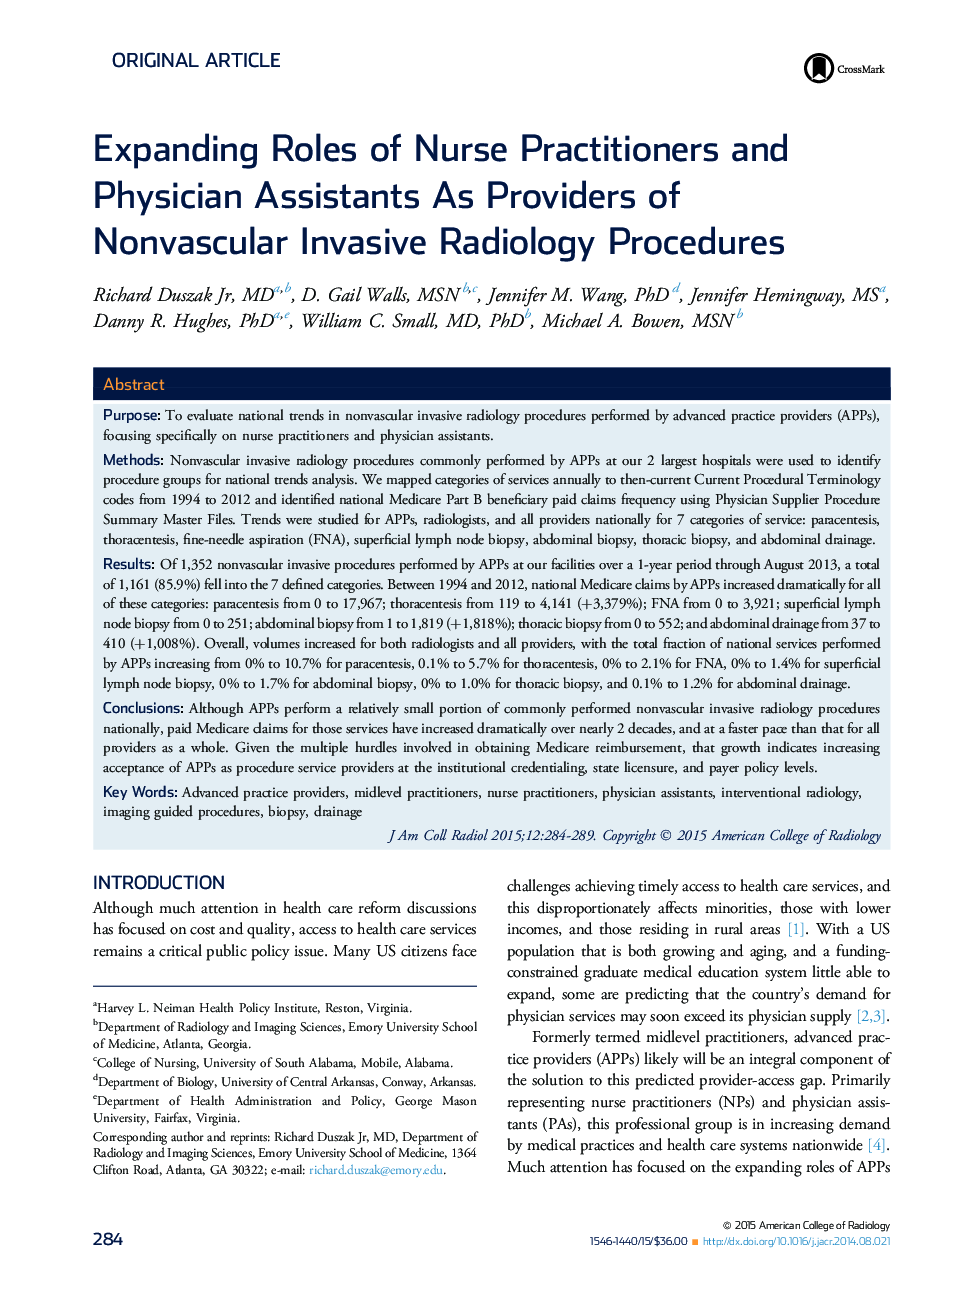 Expanding Roles of Nurse Practitioners and Physician Assistants As Providers of Nonvascular Invasive Radiology Procedures